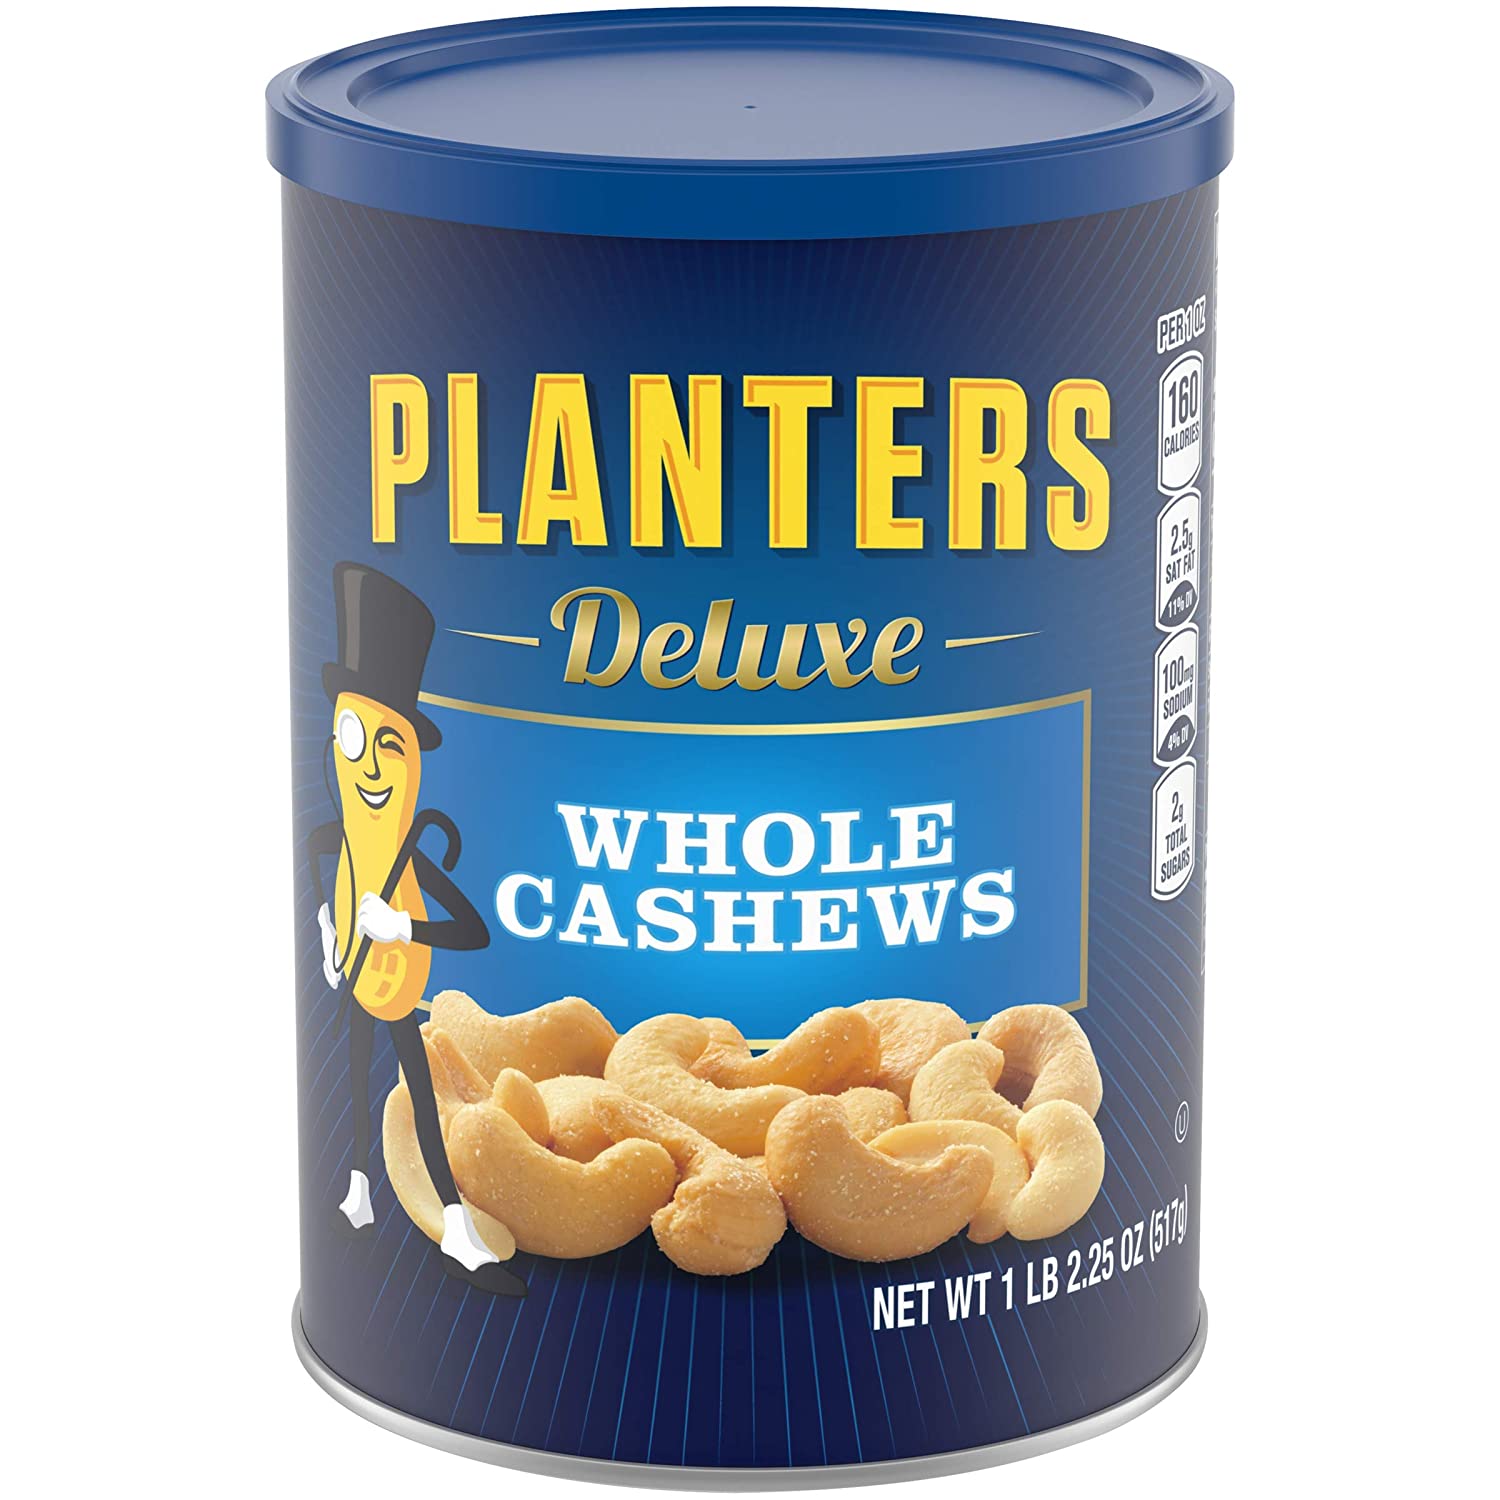 PLANTERS Deluxe Whole Cashews, 18.25 oz. Resealable Jar – Wholesome Snack Roasted in Peanut Oil with Sea Salt – Nutrient-Dense Snack & Good Source of Magnesium